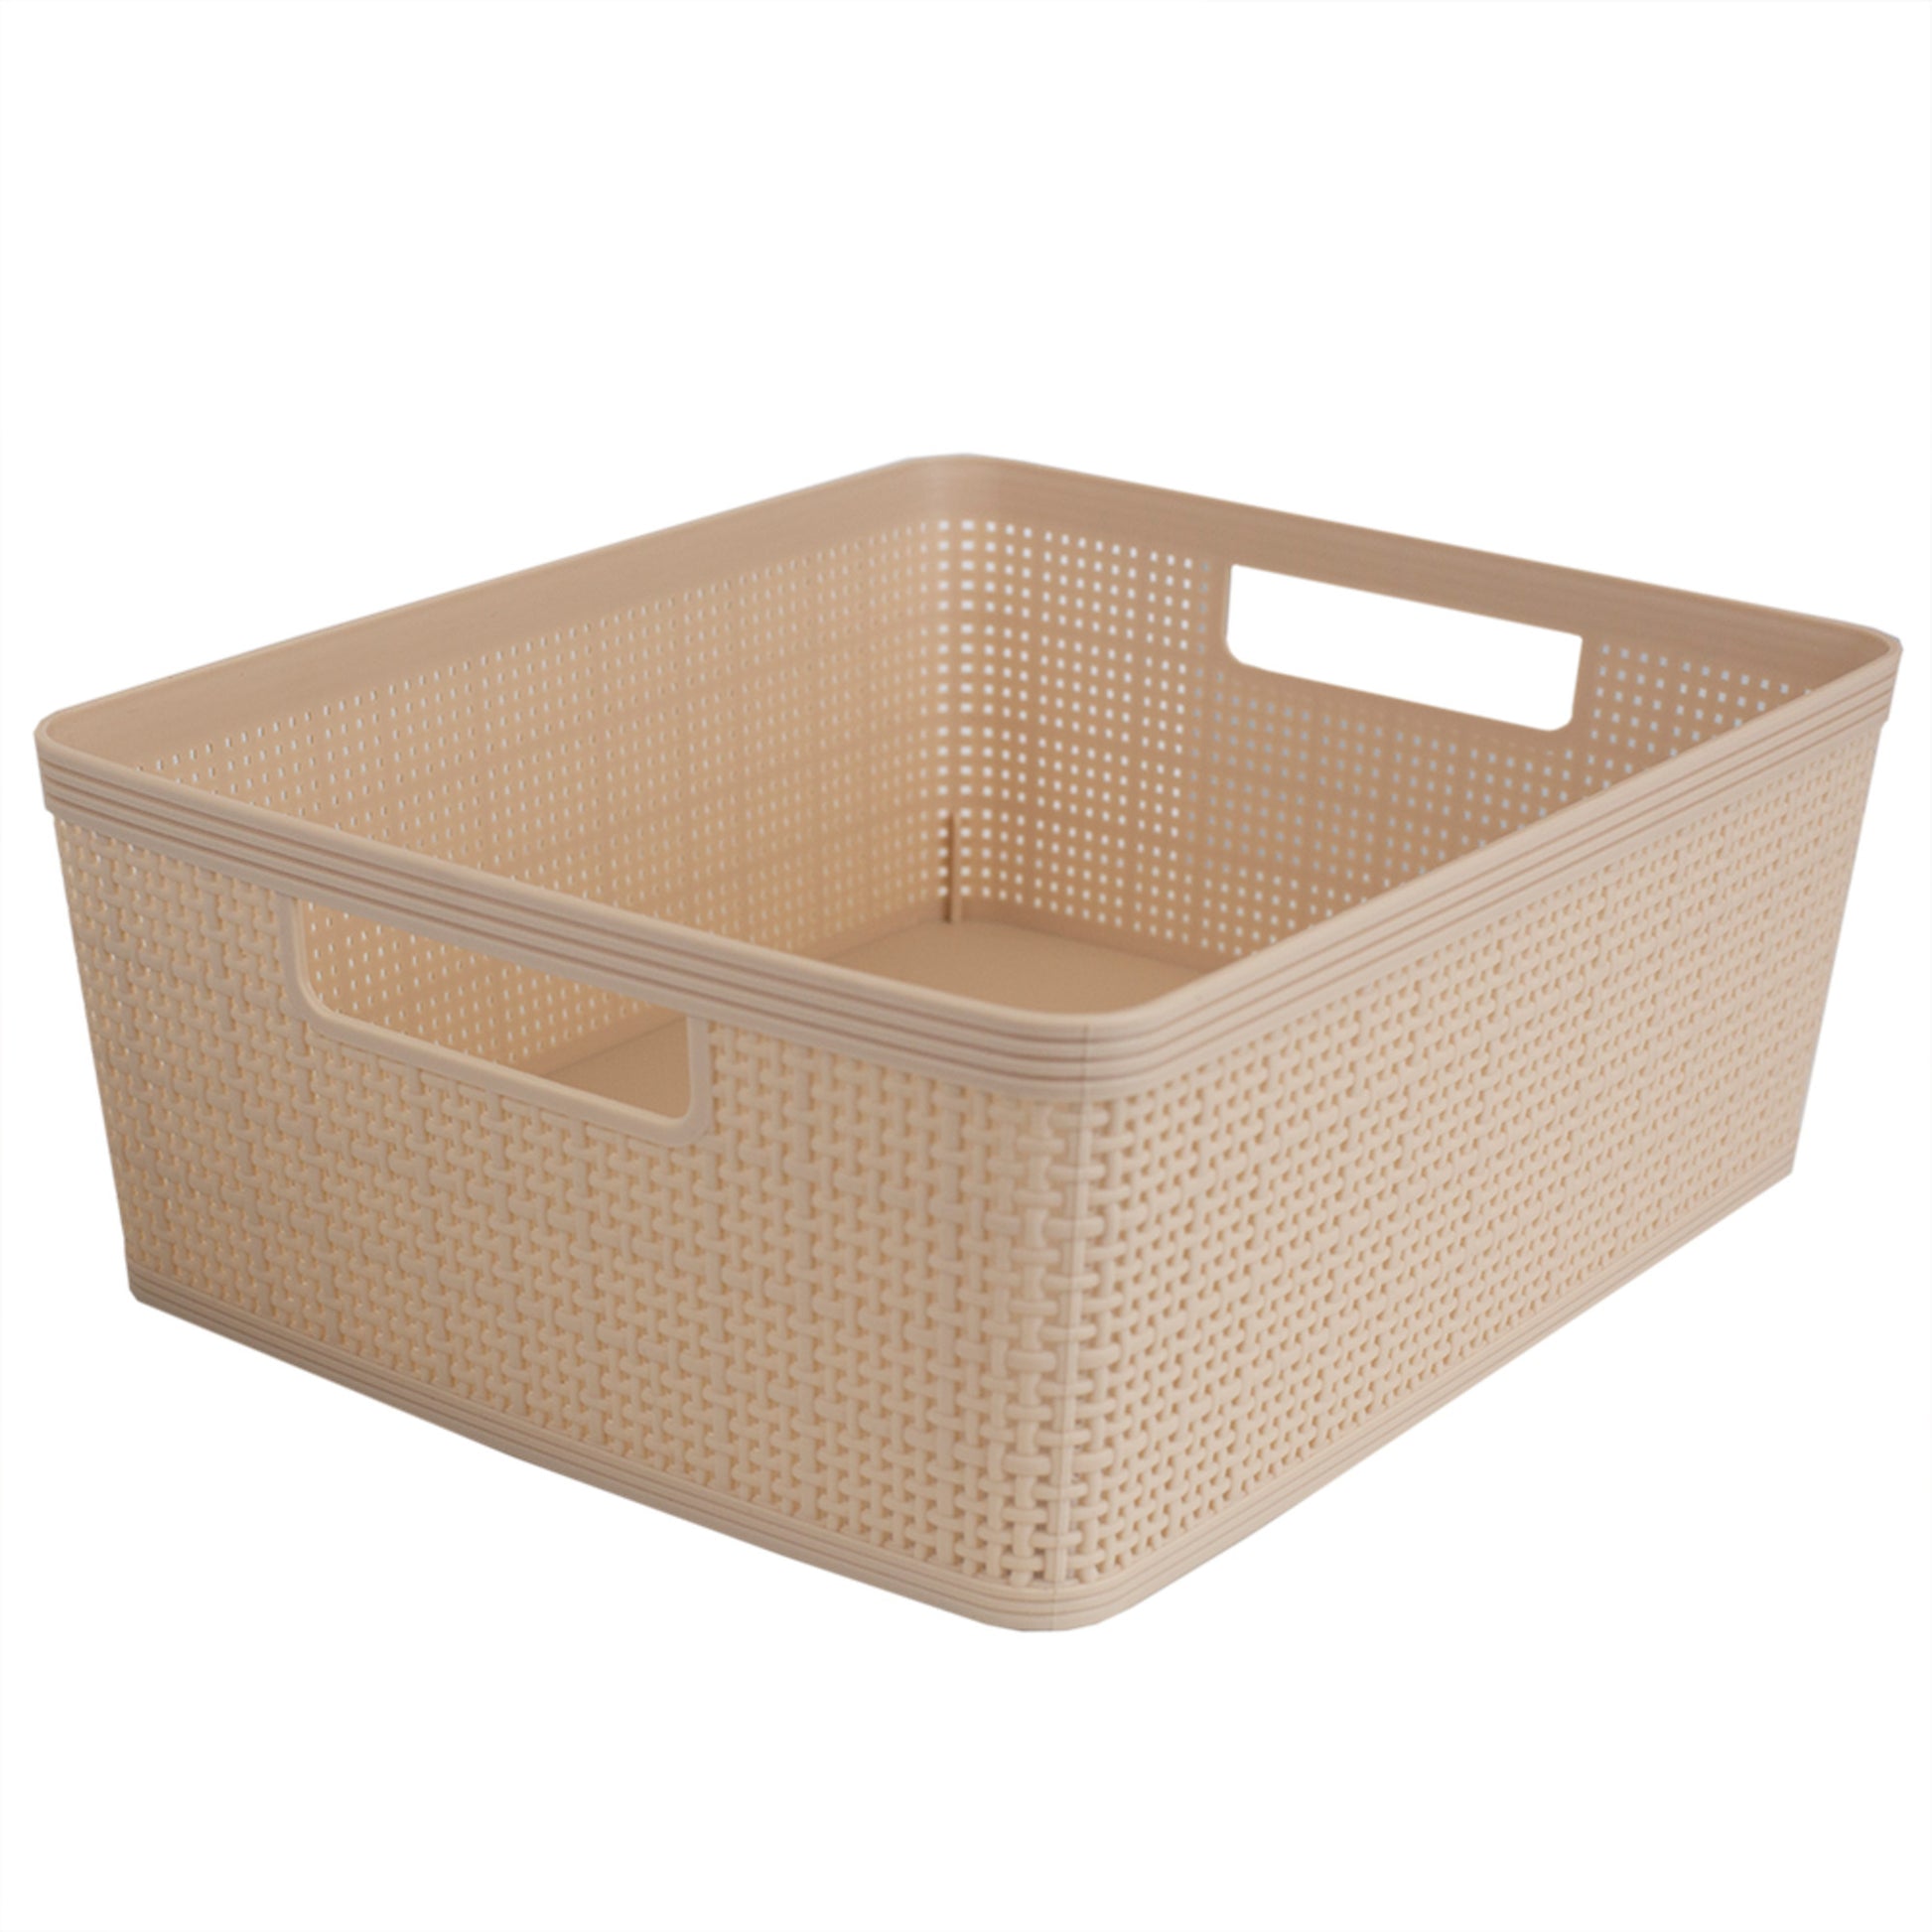 Home Basics Trellis Large Plastic Storage Basket with Cut-Out Handles, Brown - Brown